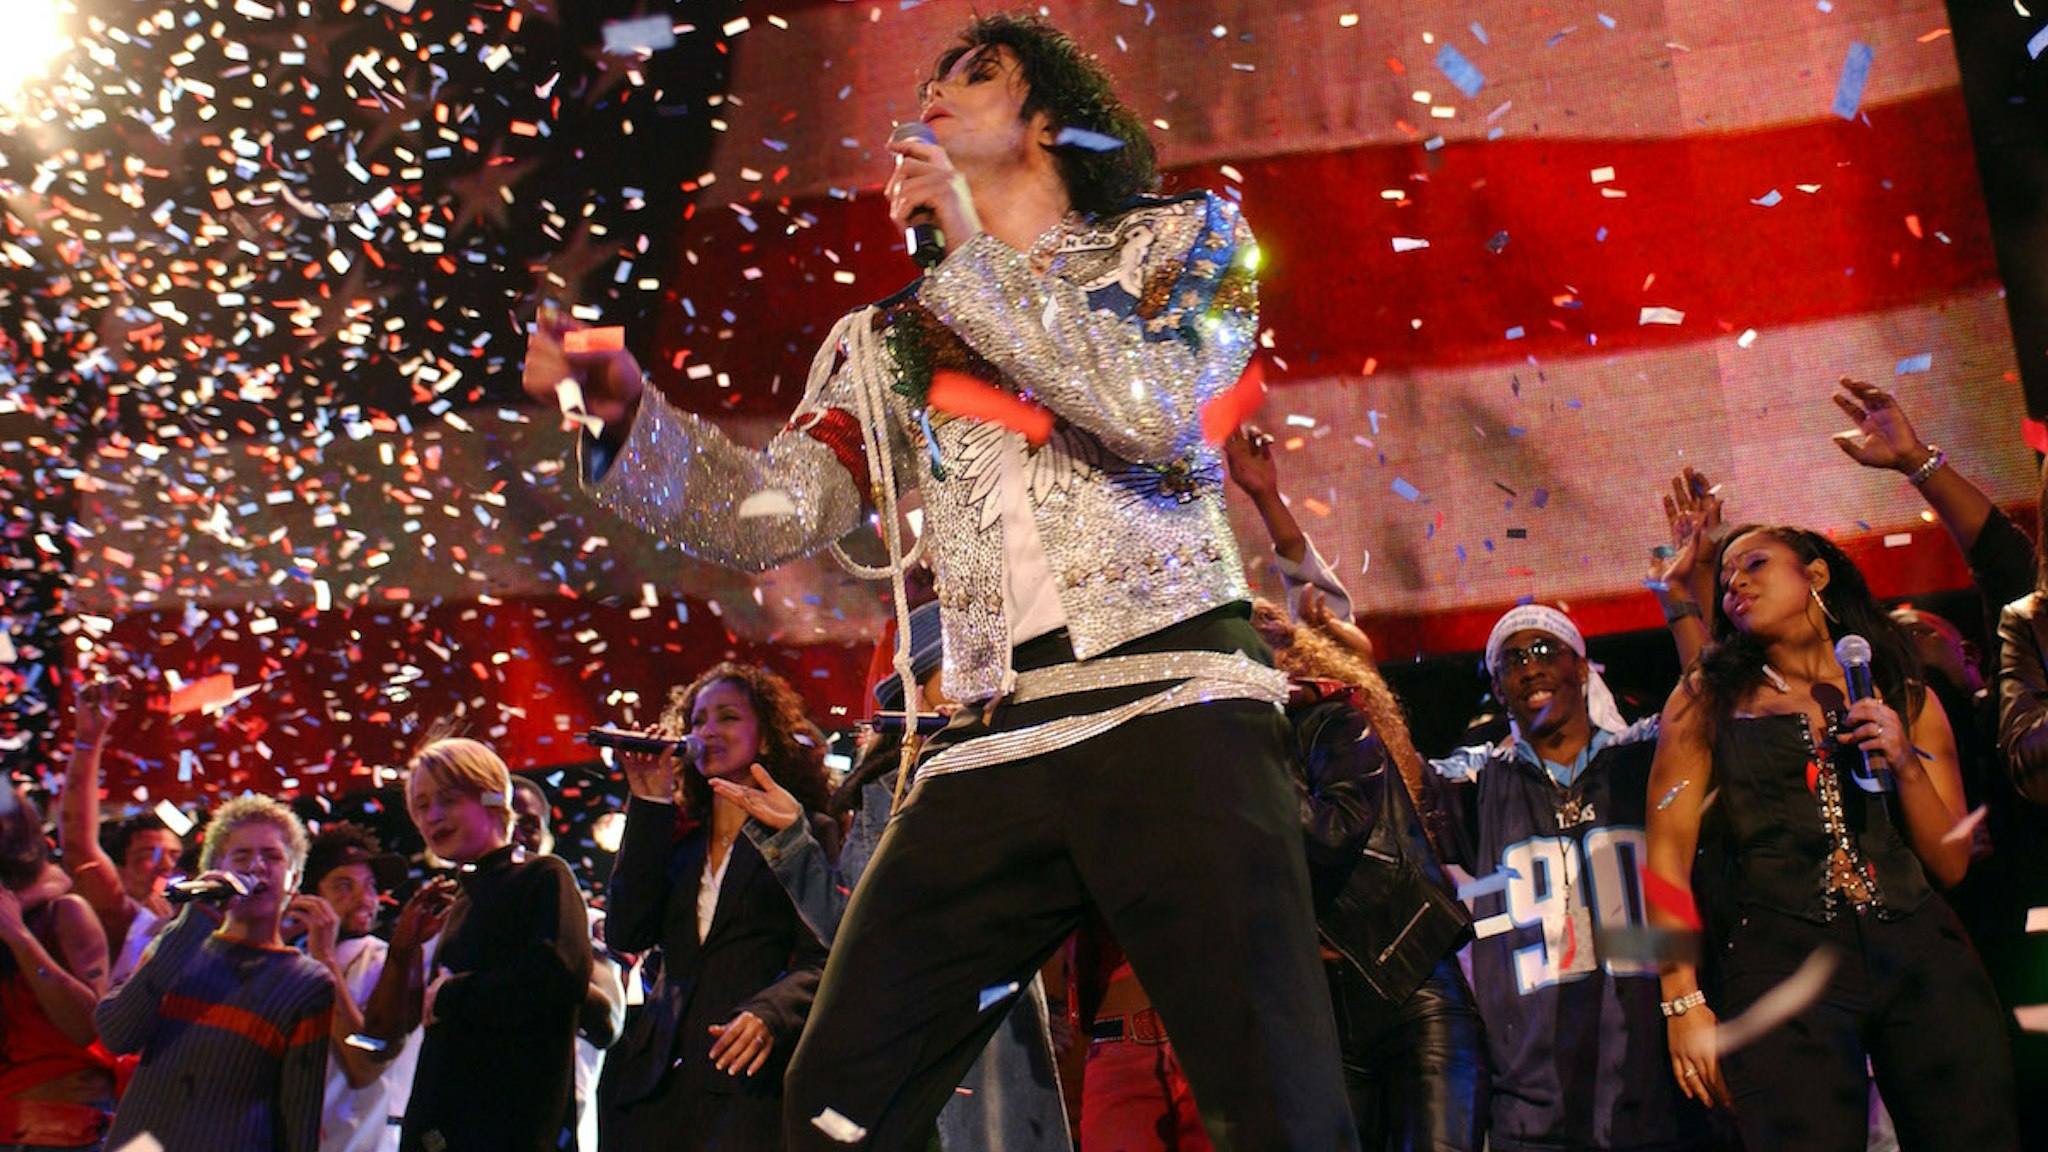 Michael Jackson performs with Billy Gilman, Macaulay Culkin and others during finale (Photo by KMazur/WireImage)